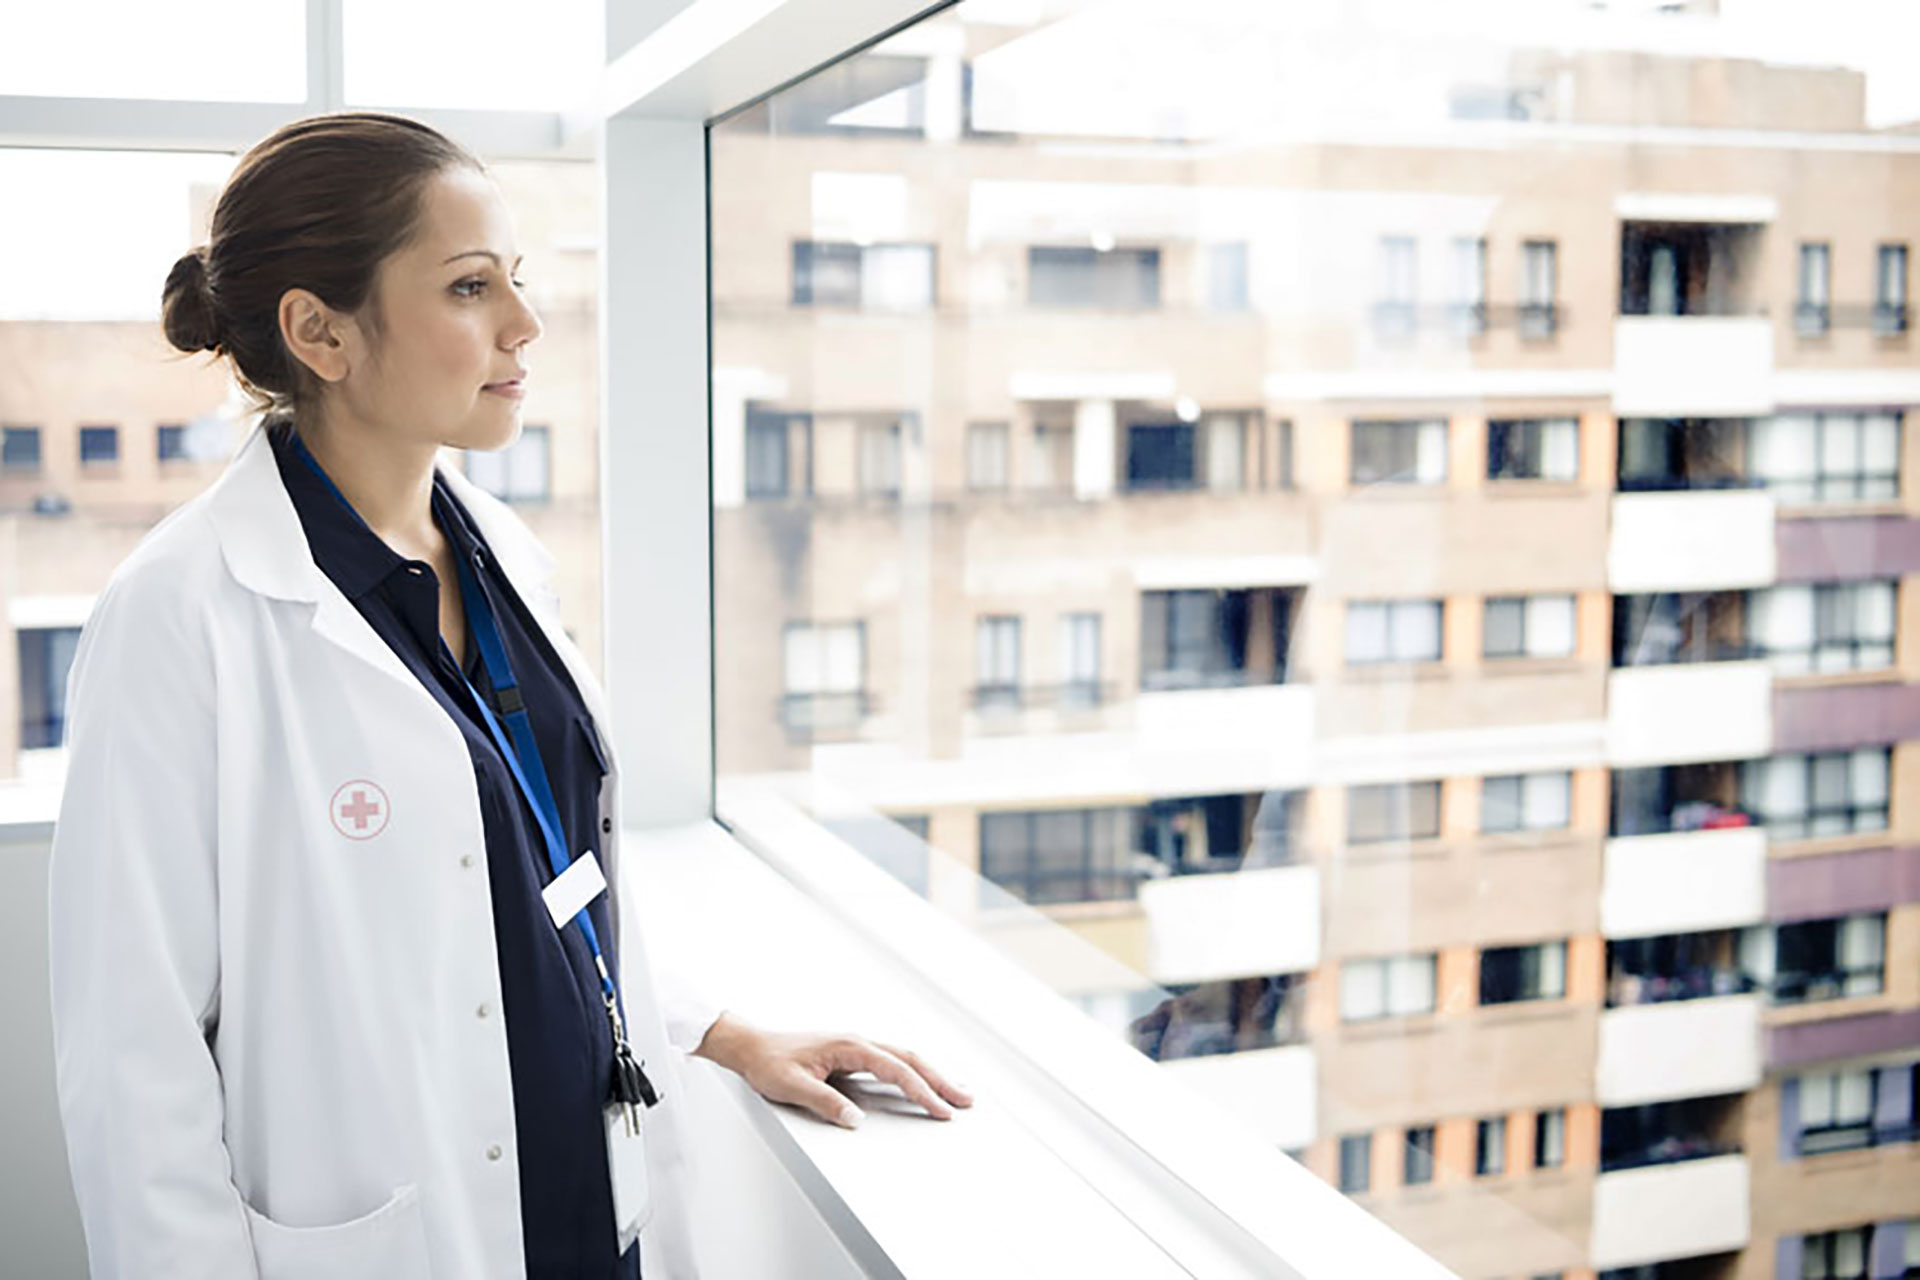 A medical practitioner looking out a window of health care facility in urban environment.